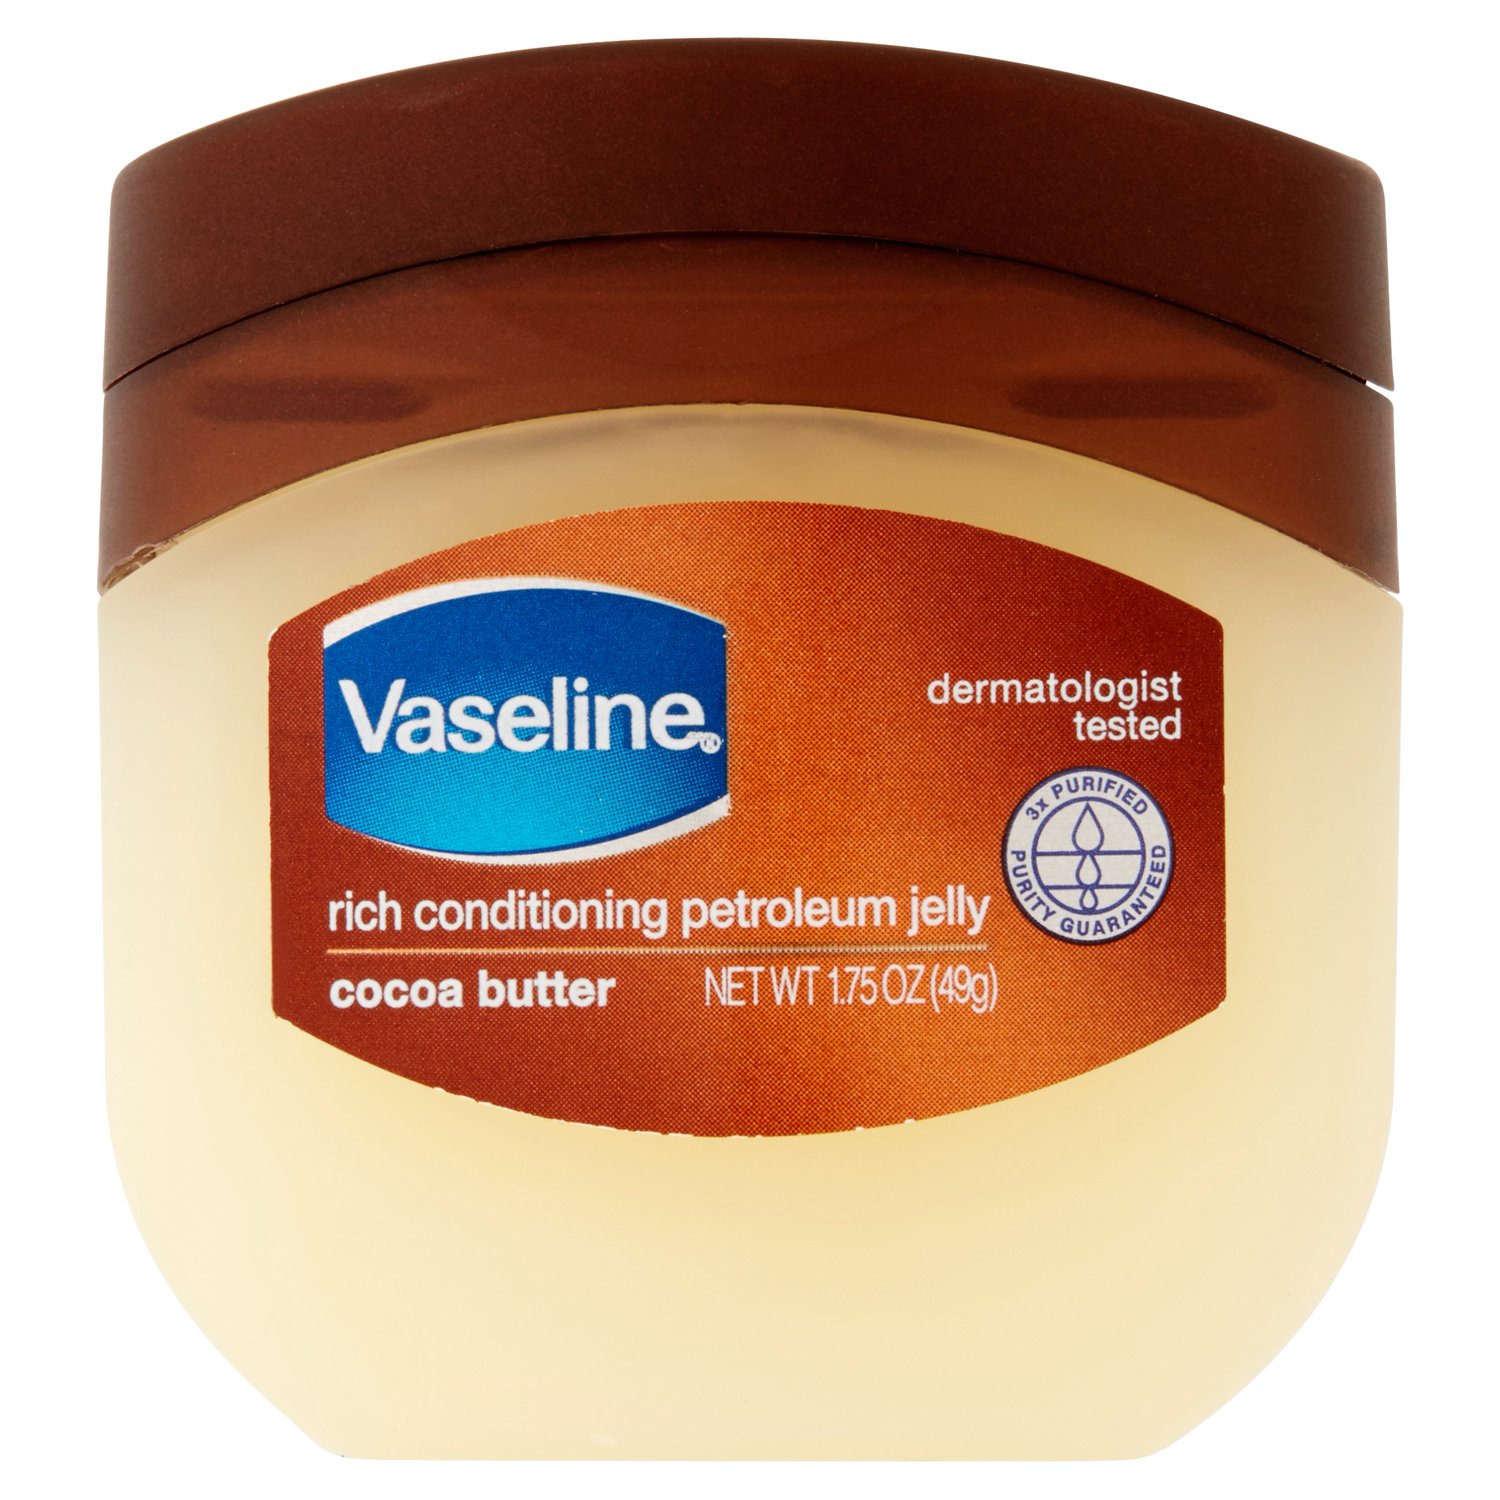 Vaseline Rich Conditioning Cocoa Butter Healing Petroleum Jelly for Dry Skin, 1.75 oz - image 1 of 6